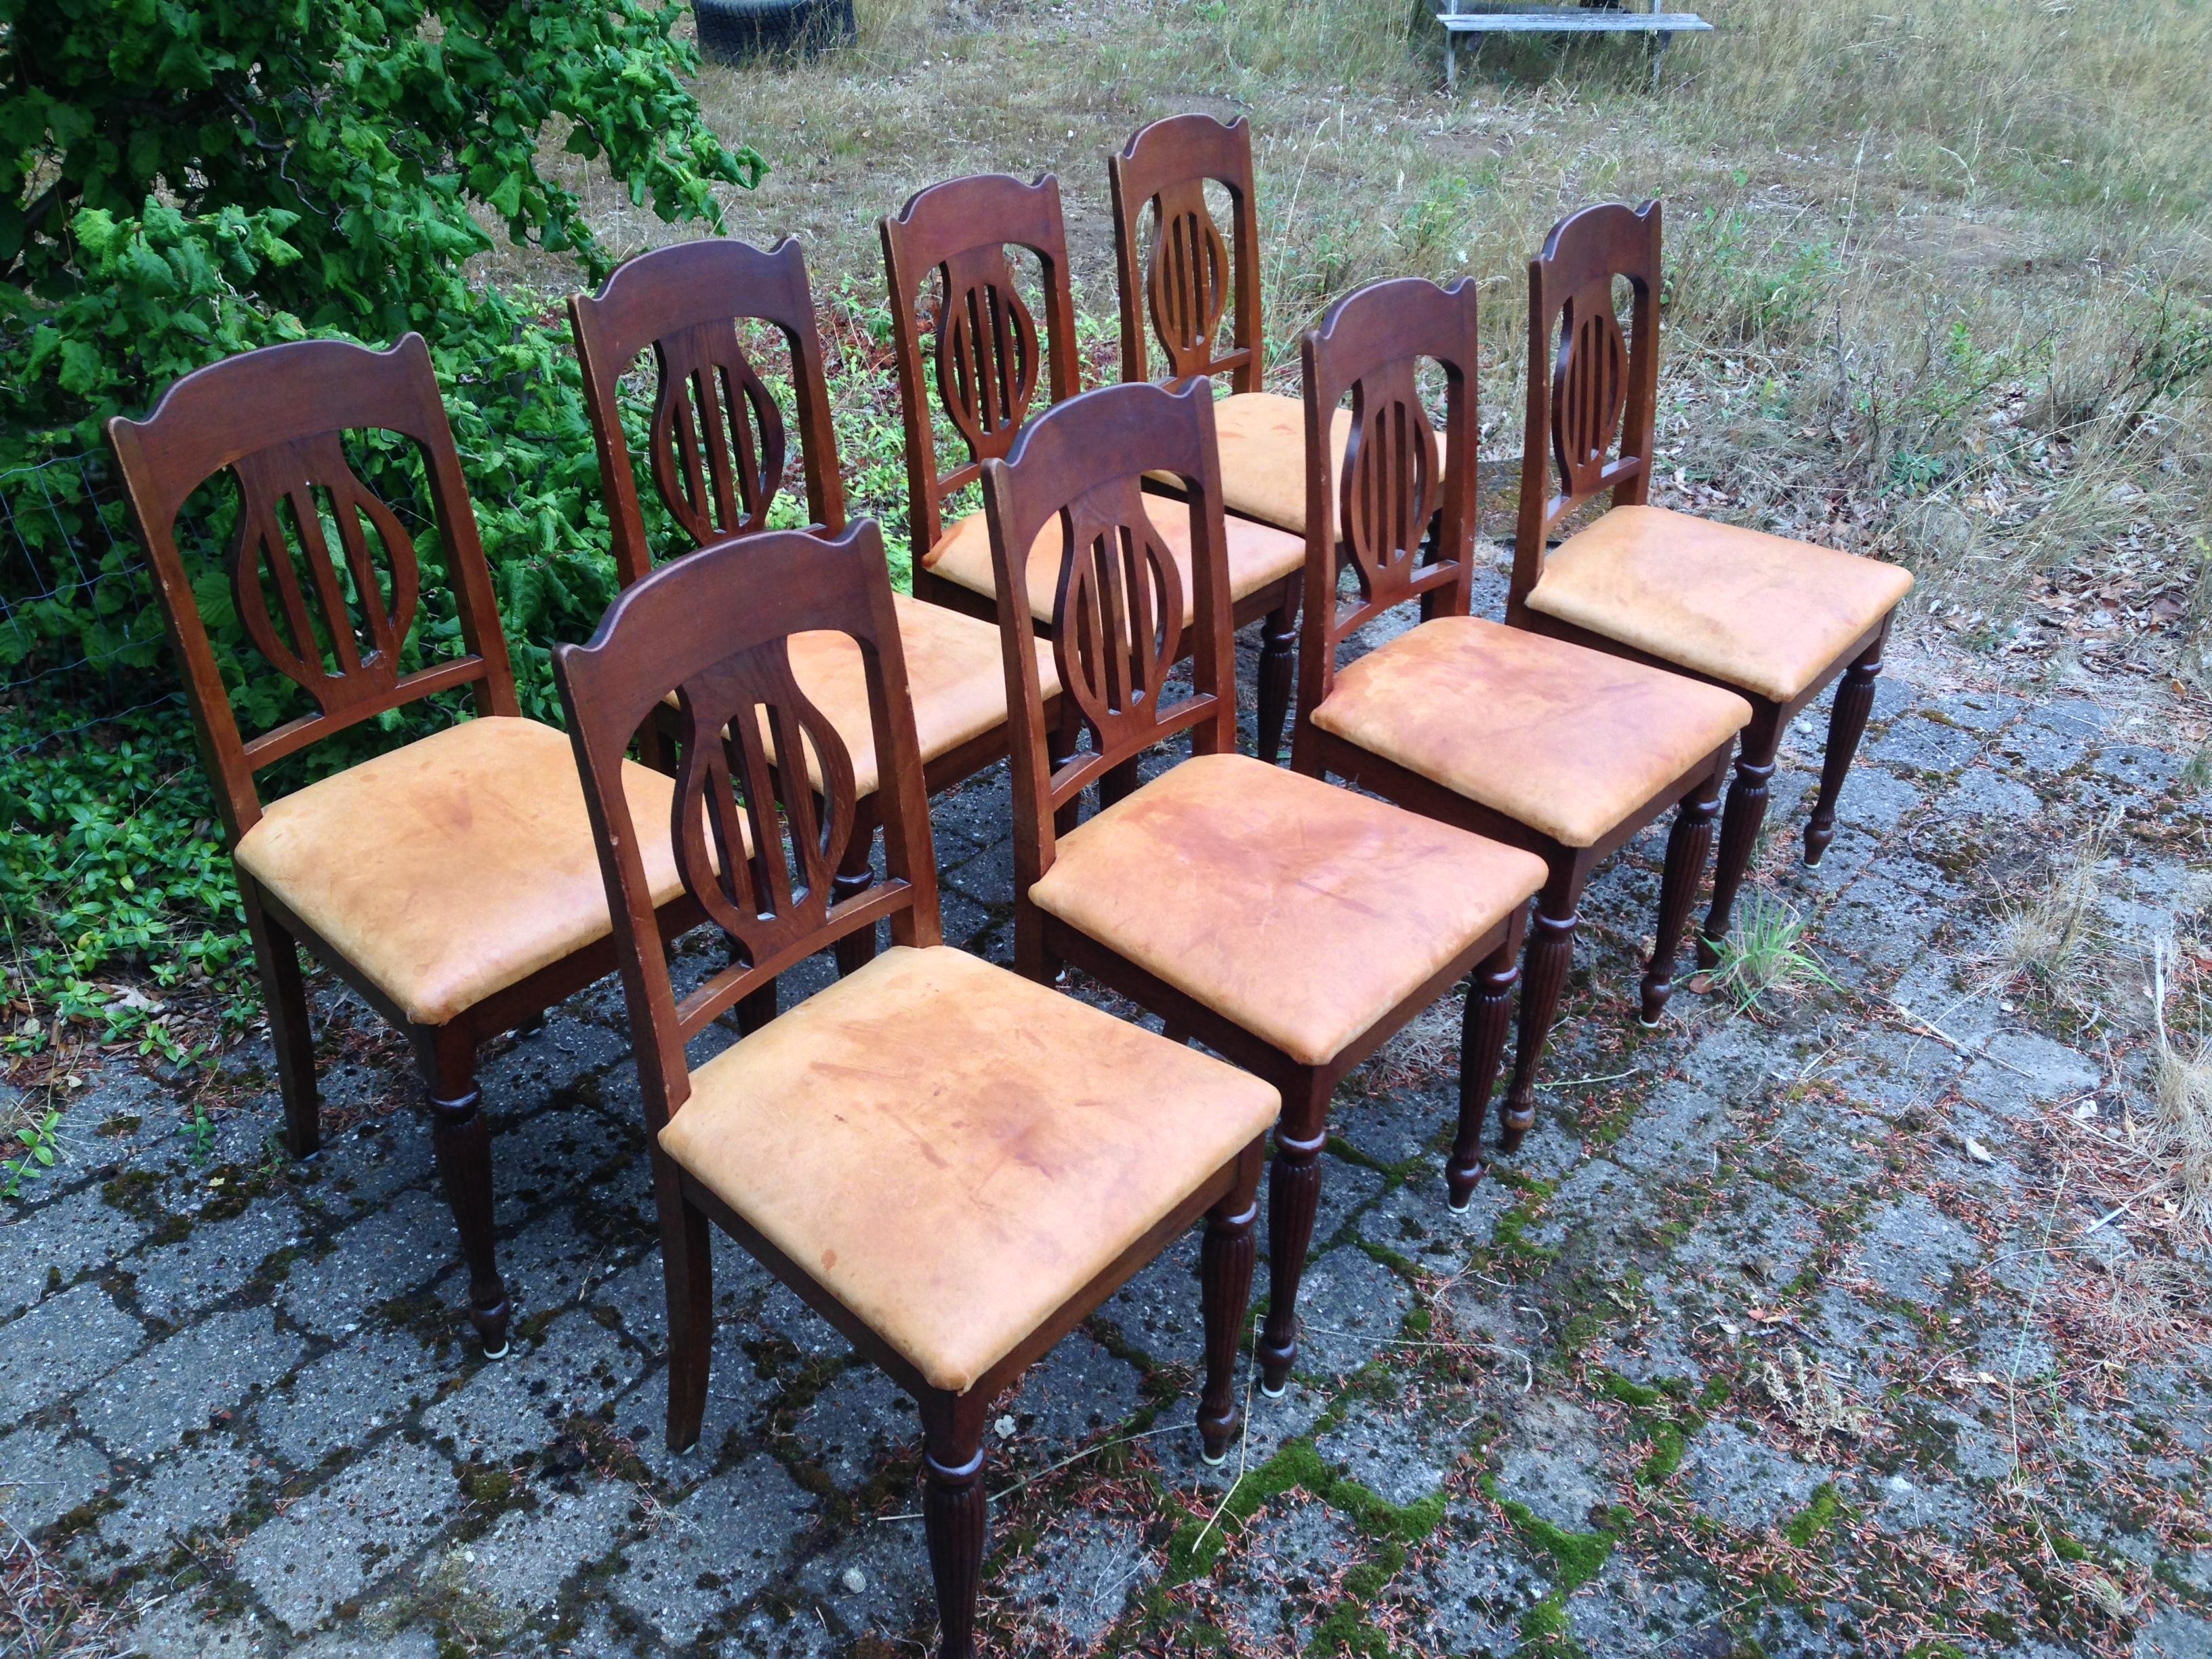 Early 20th Century Set of 8 Art Nouveau Chairs in Mahogany and Light Oxhide Seats, 1910s-1920s For Sale